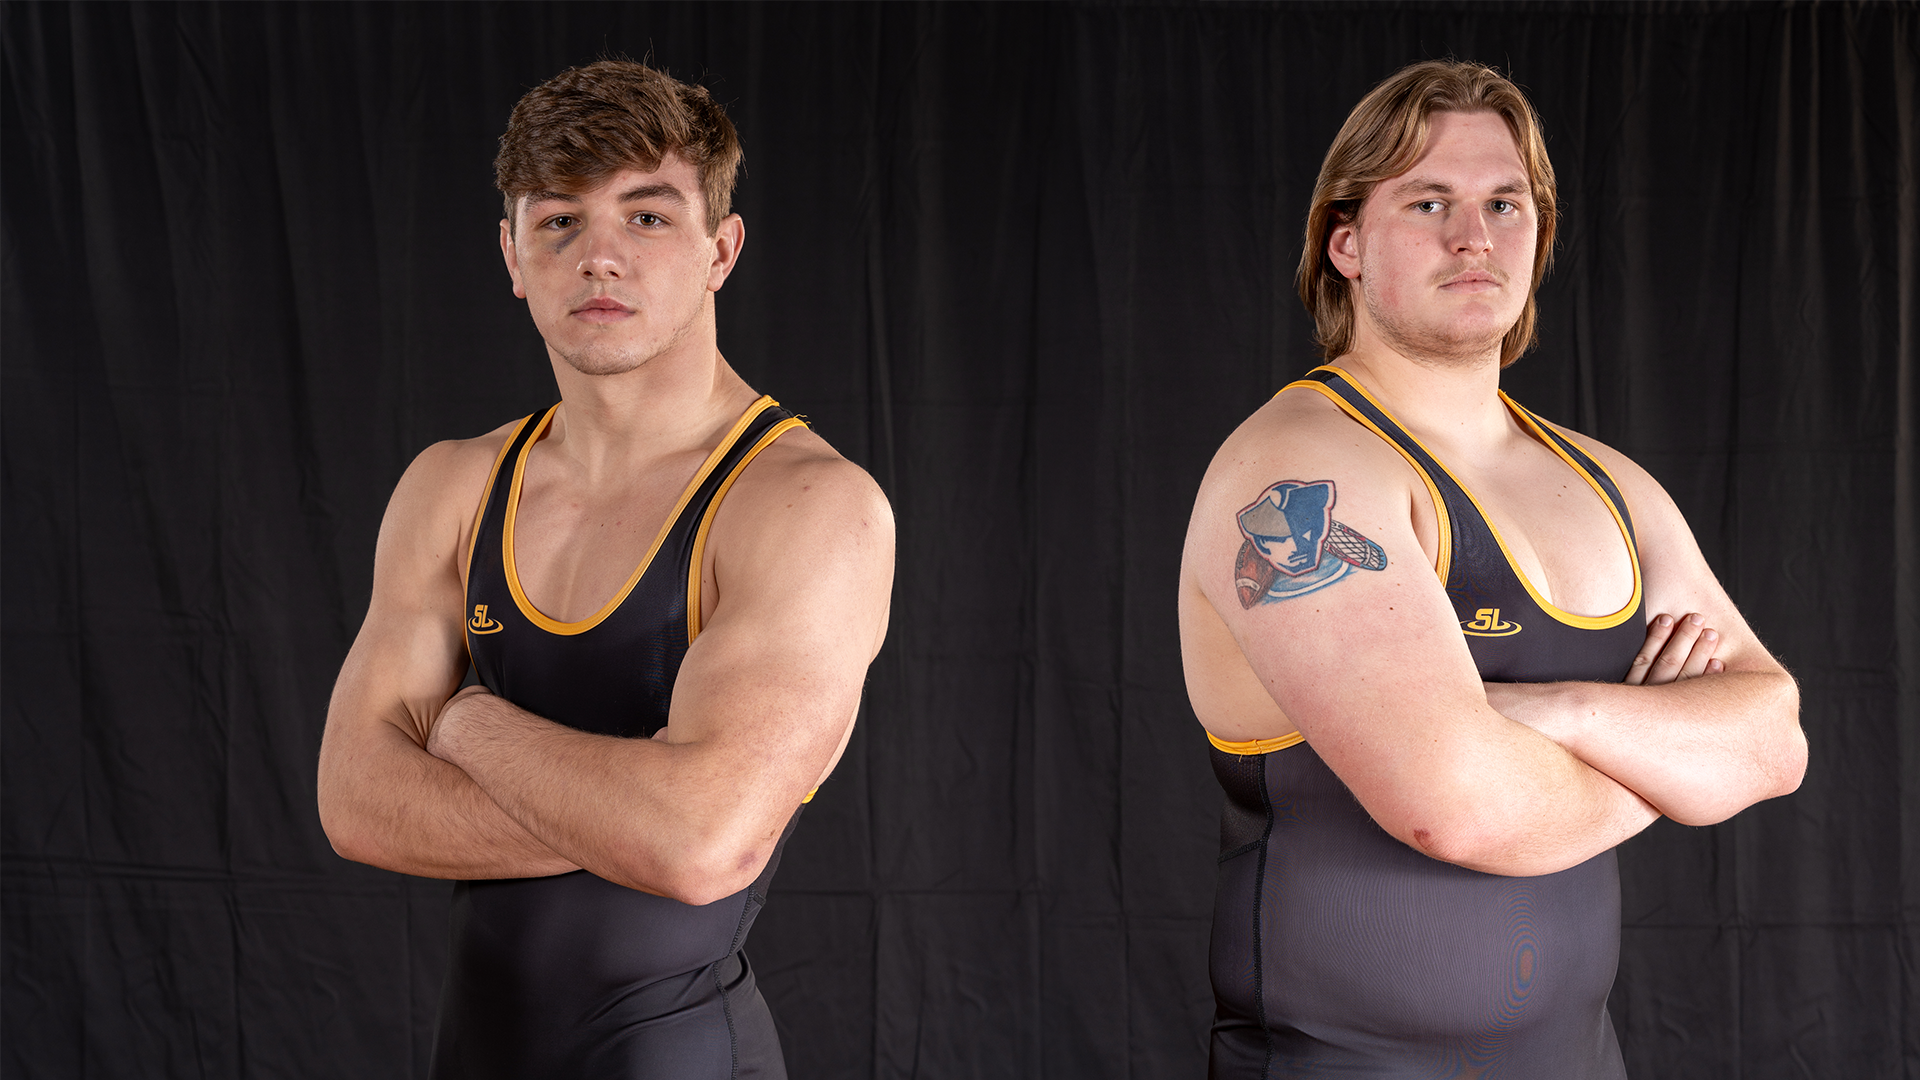 Wrestling competes at "Shorty" Hitchcock Classic at Millersville